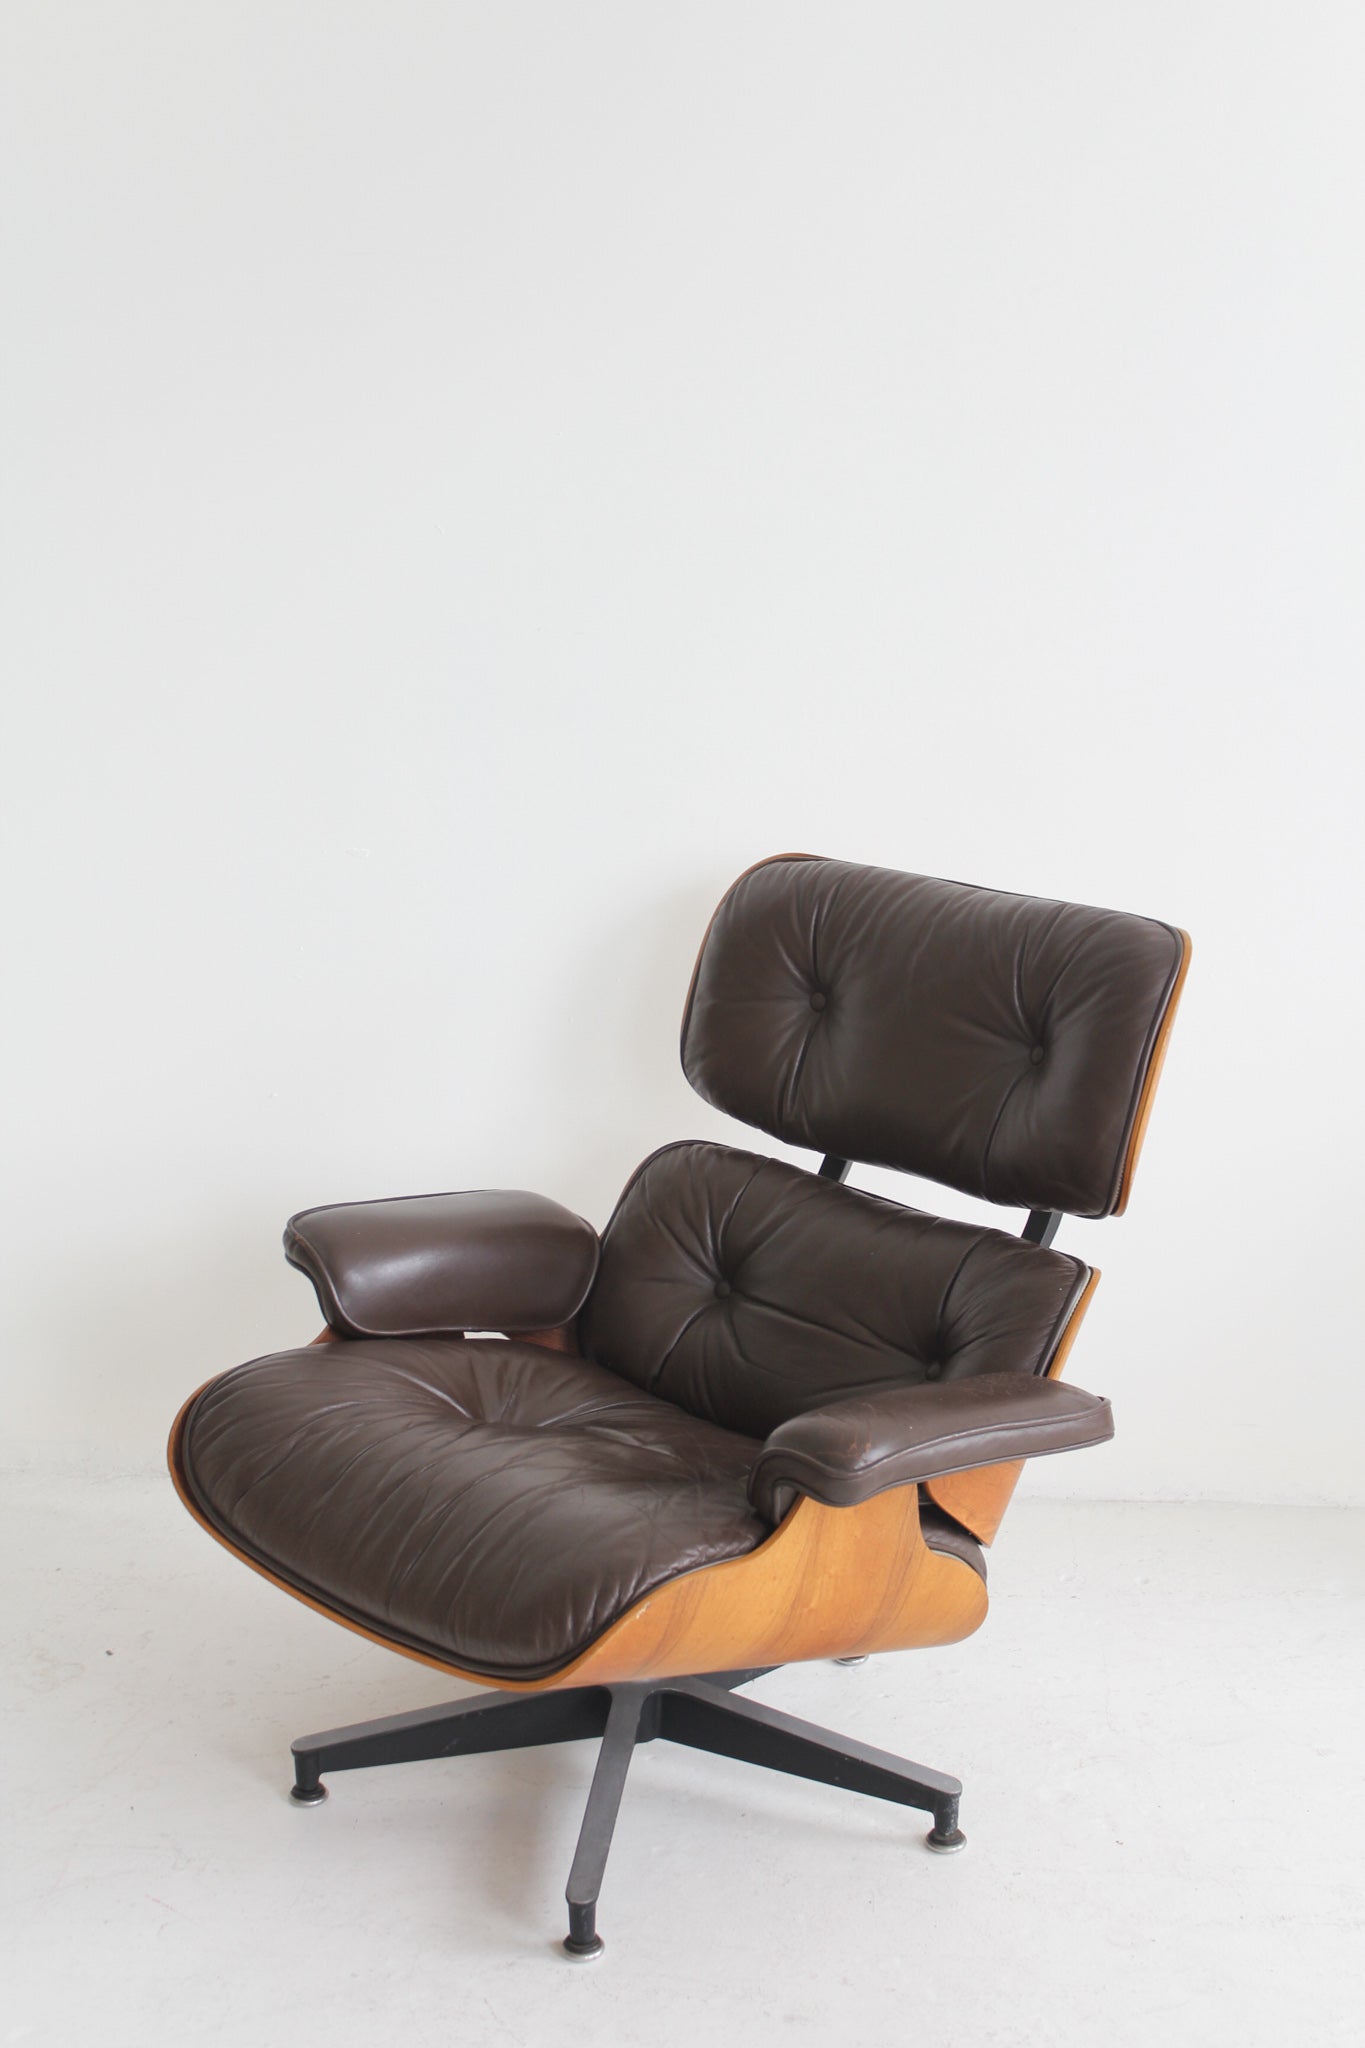 Charles and Ray Eames Lounge Chair 670 by Herman Miller